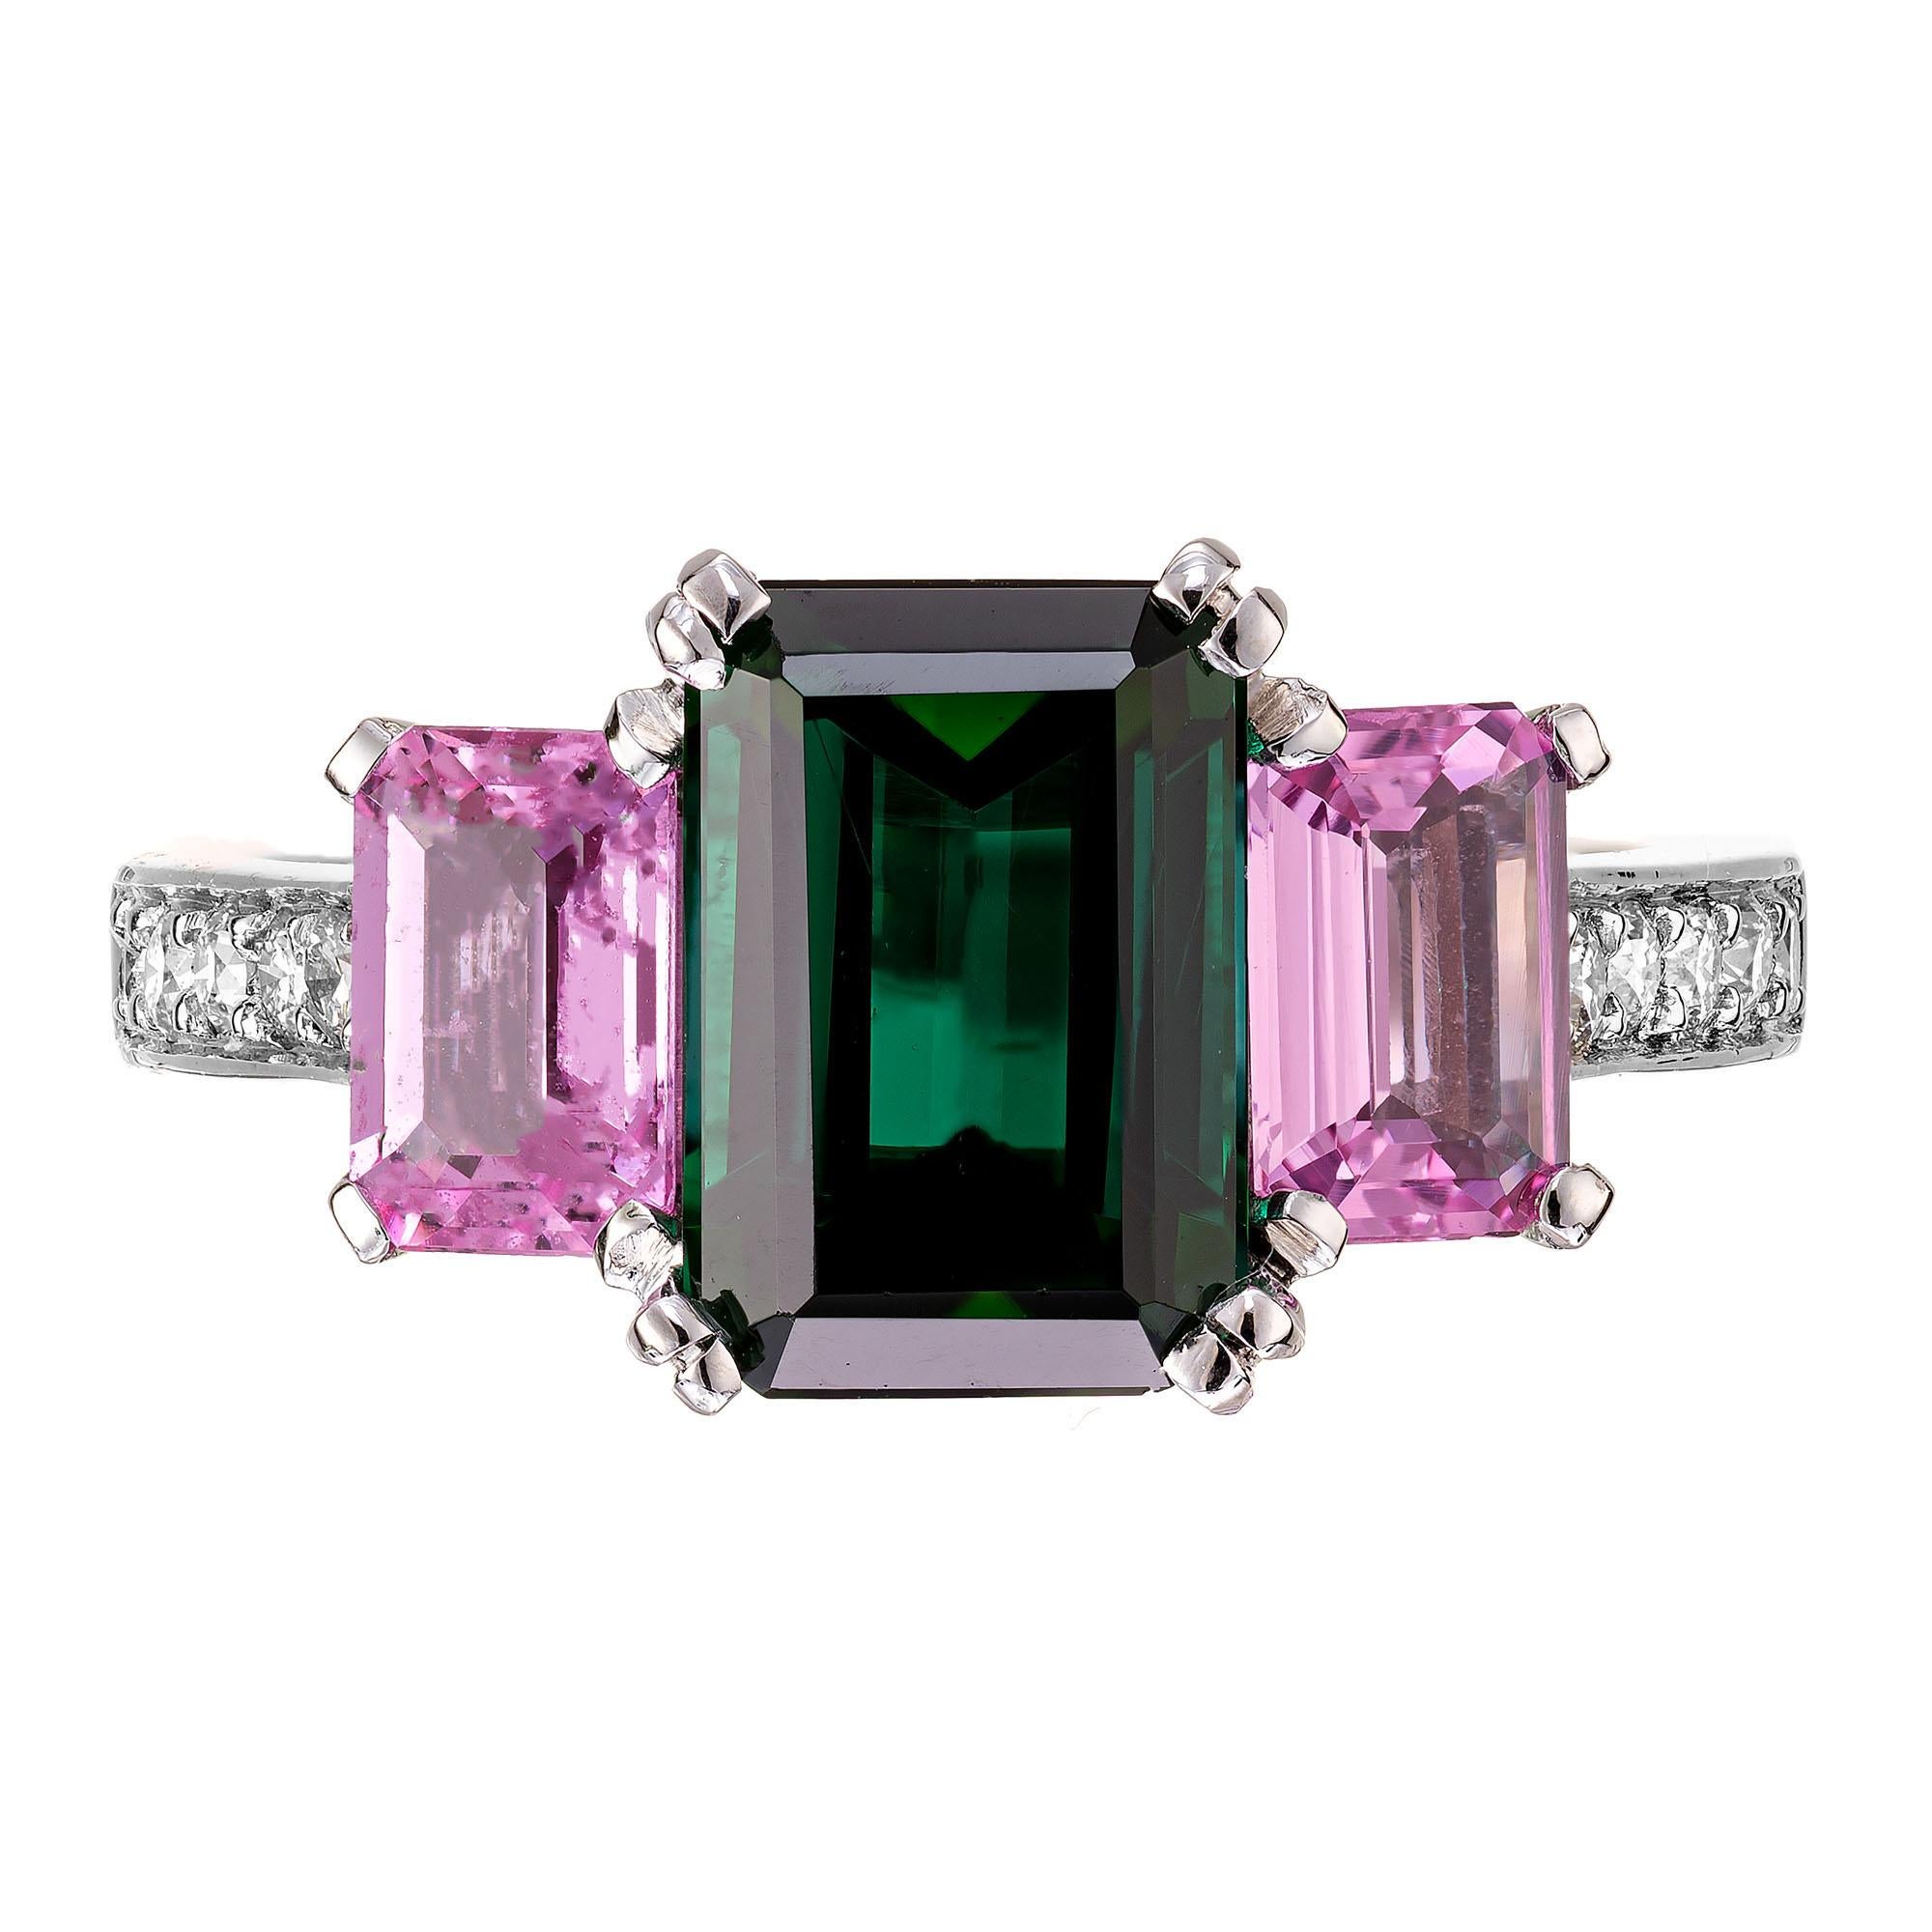 Tourmaline, sapphire and diamond engagement ring. Bright green emerald cut tourmaline center stone with 2 pink sapphire on each side in a three-stone platinum engagement setting, with pave diamonds along each side of the shank. Designed and crafted